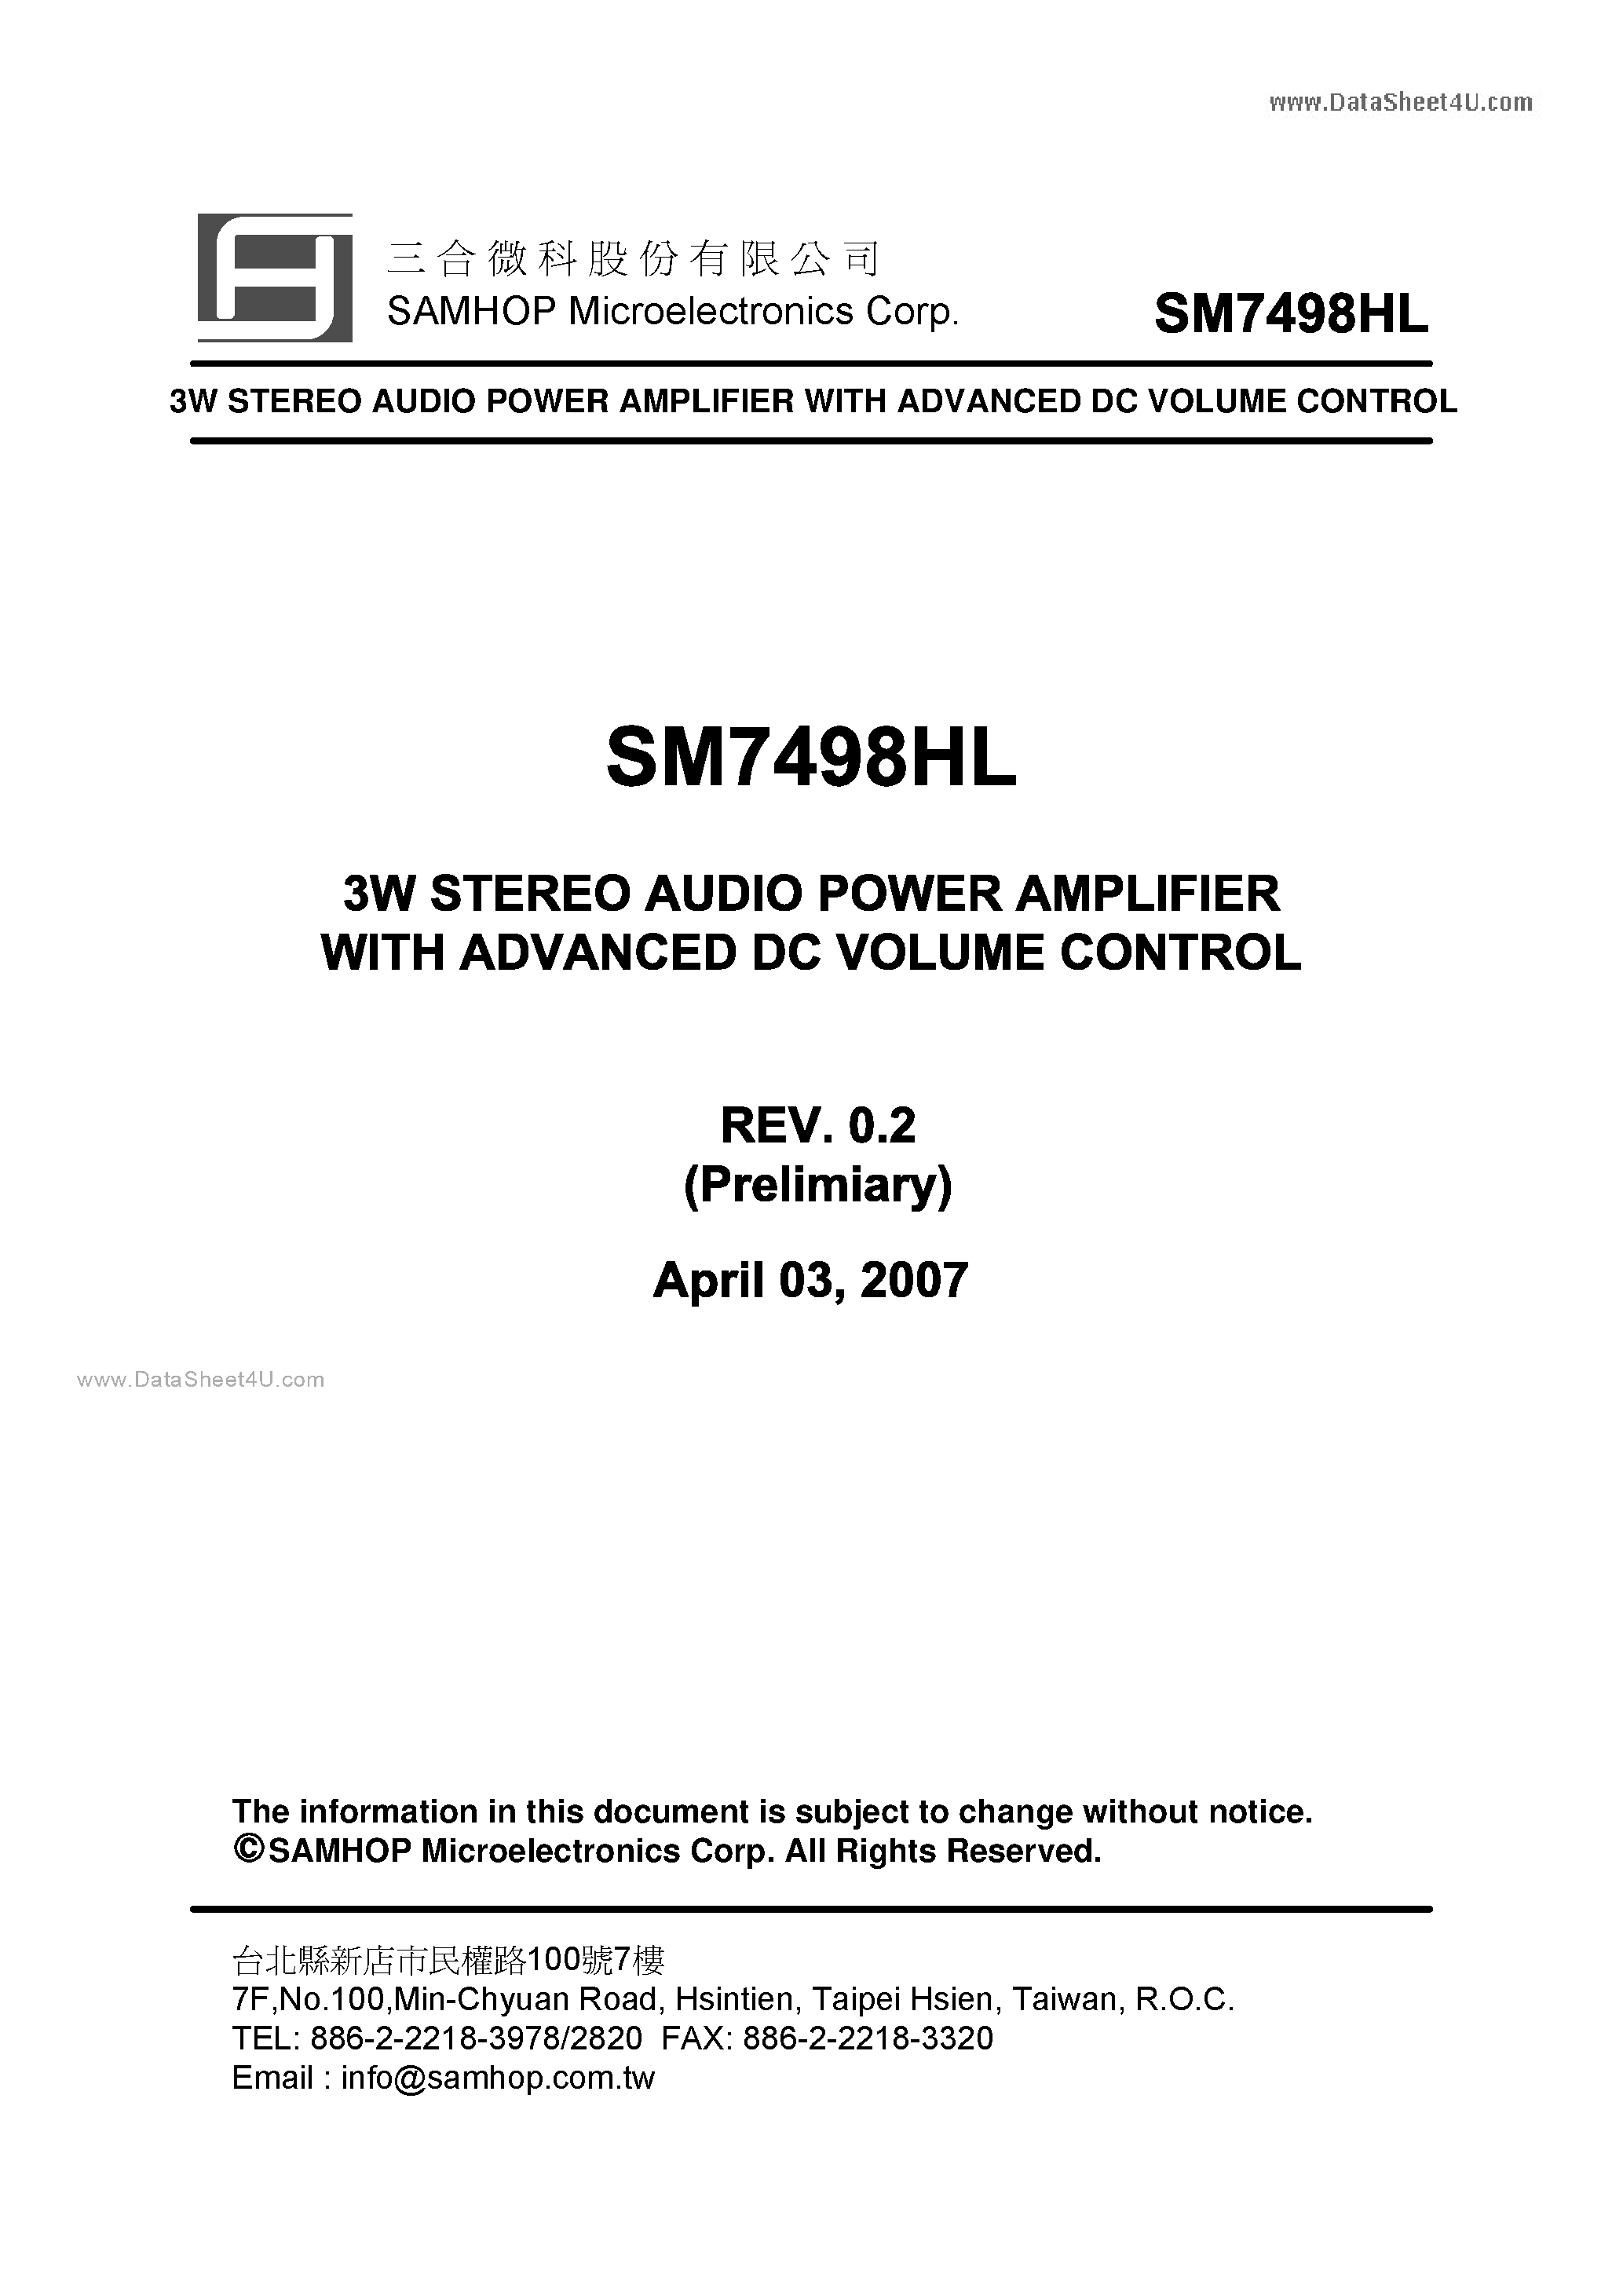 Datasheet SM7498HL - 3W STEREO AUDIO POWER AMPLIFIER page 1